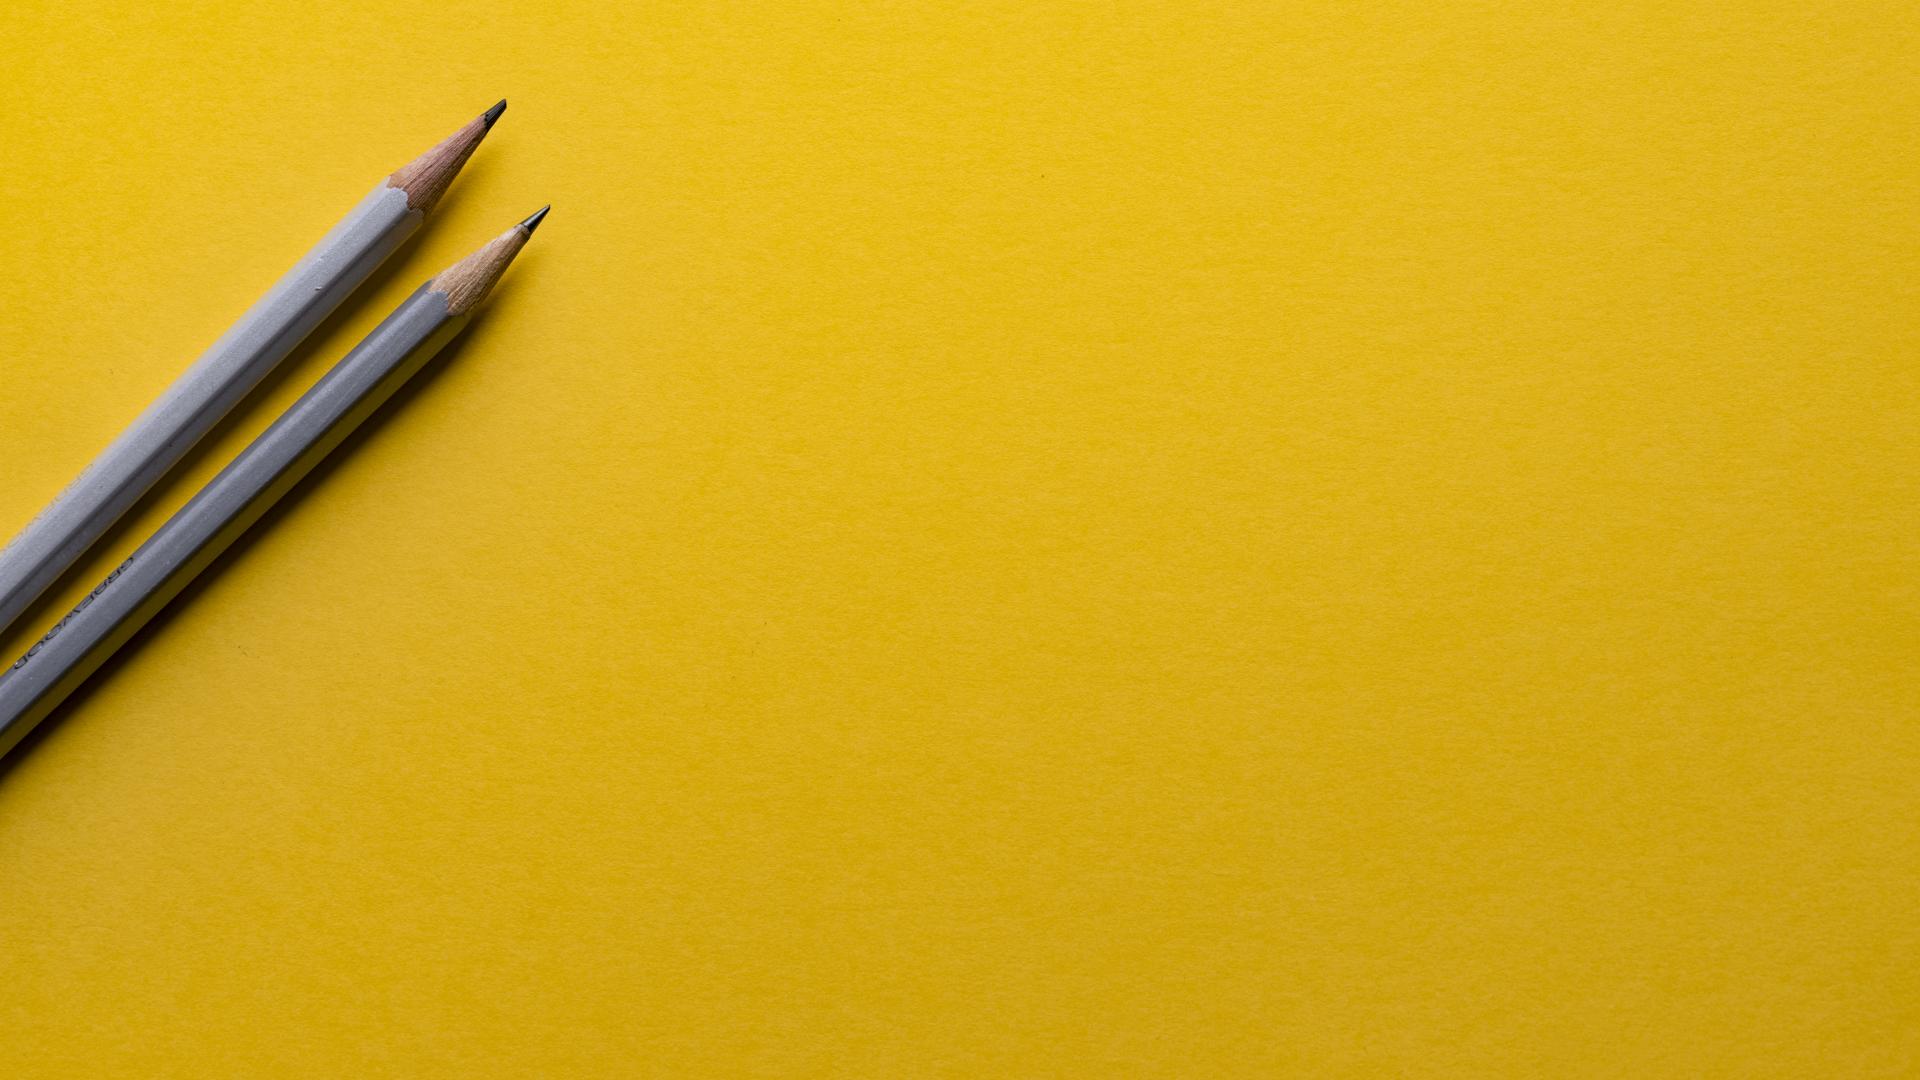 Two pencils laying on a yellow background